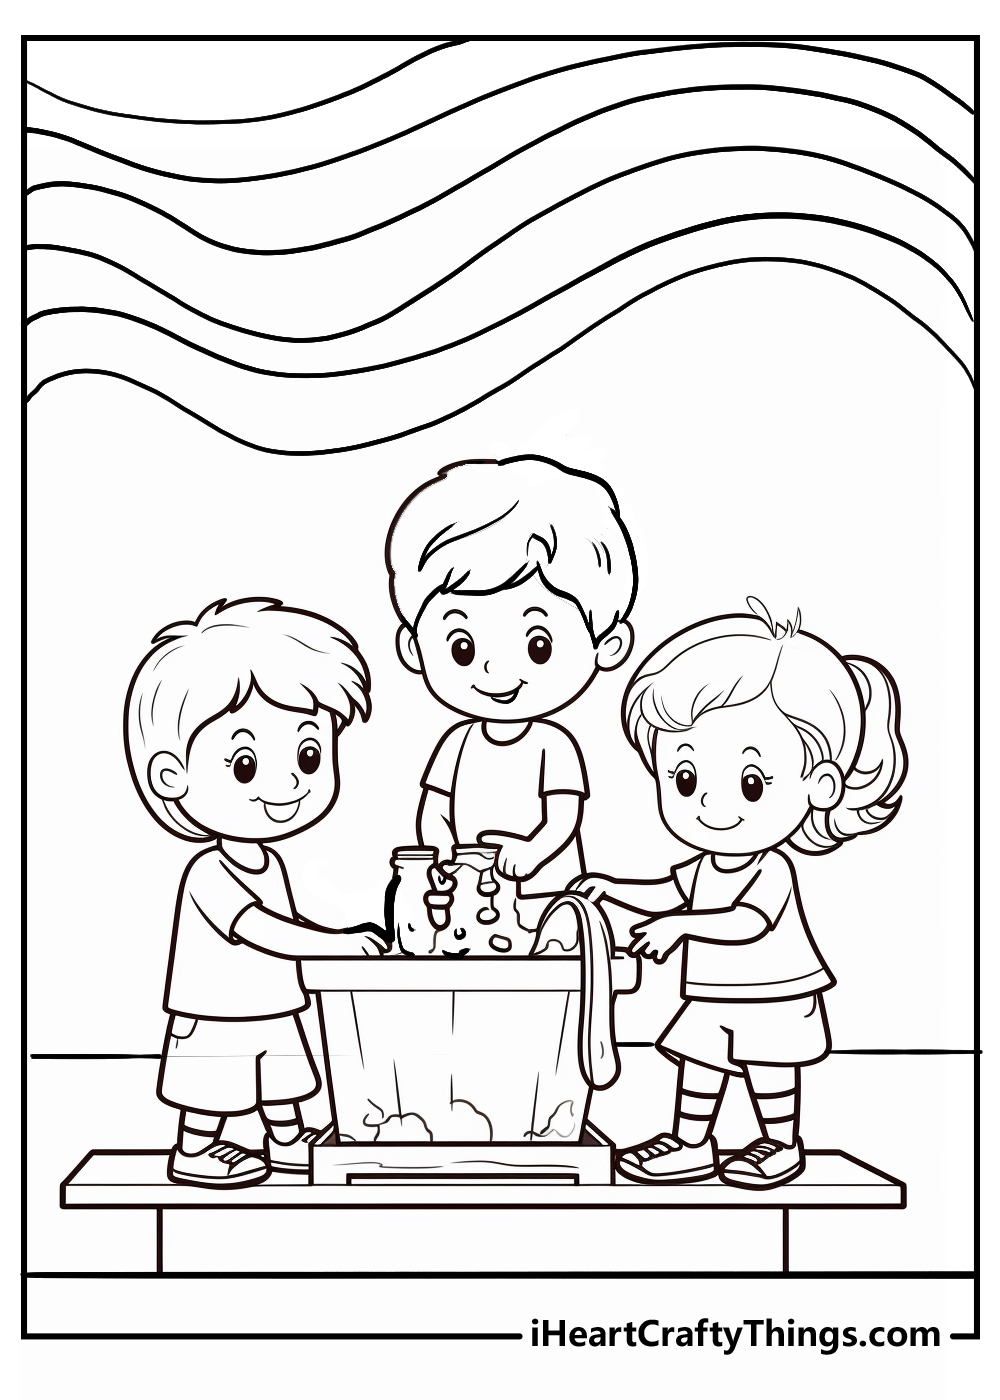 rainbow with friends coloring sheet free download